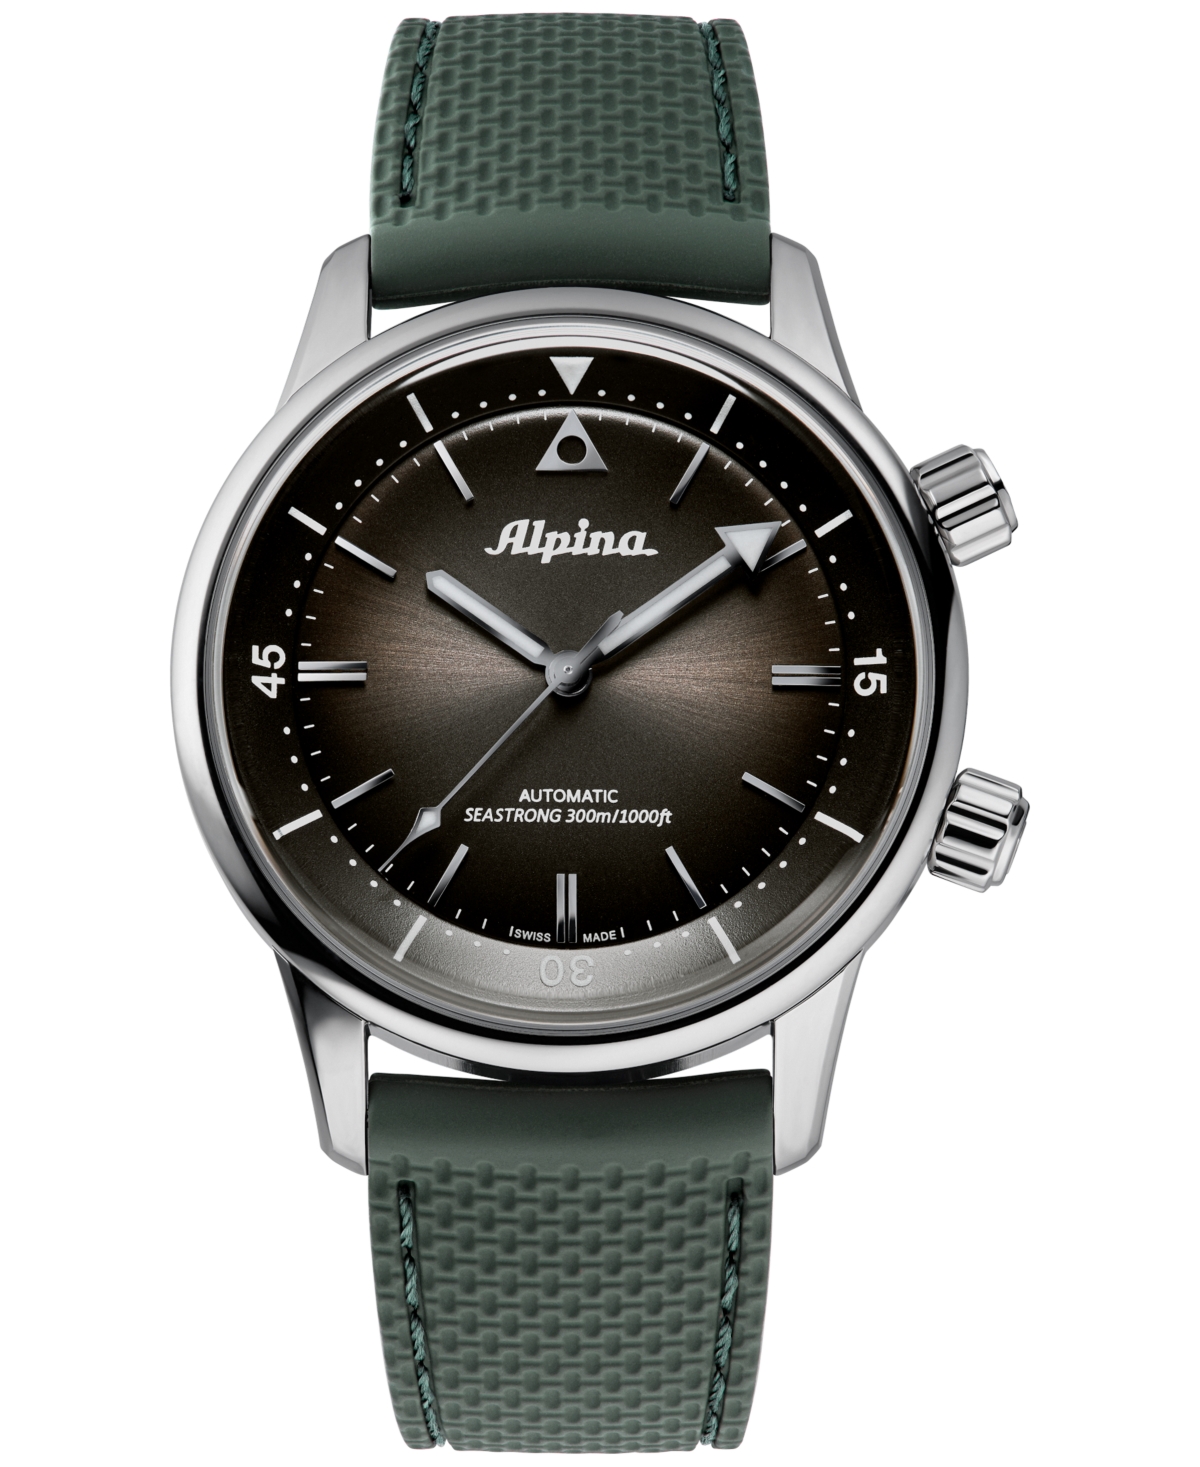 Alpina Men's Swiss Automatic Seastrong Diver Green Rubber Strap Watch 42mm